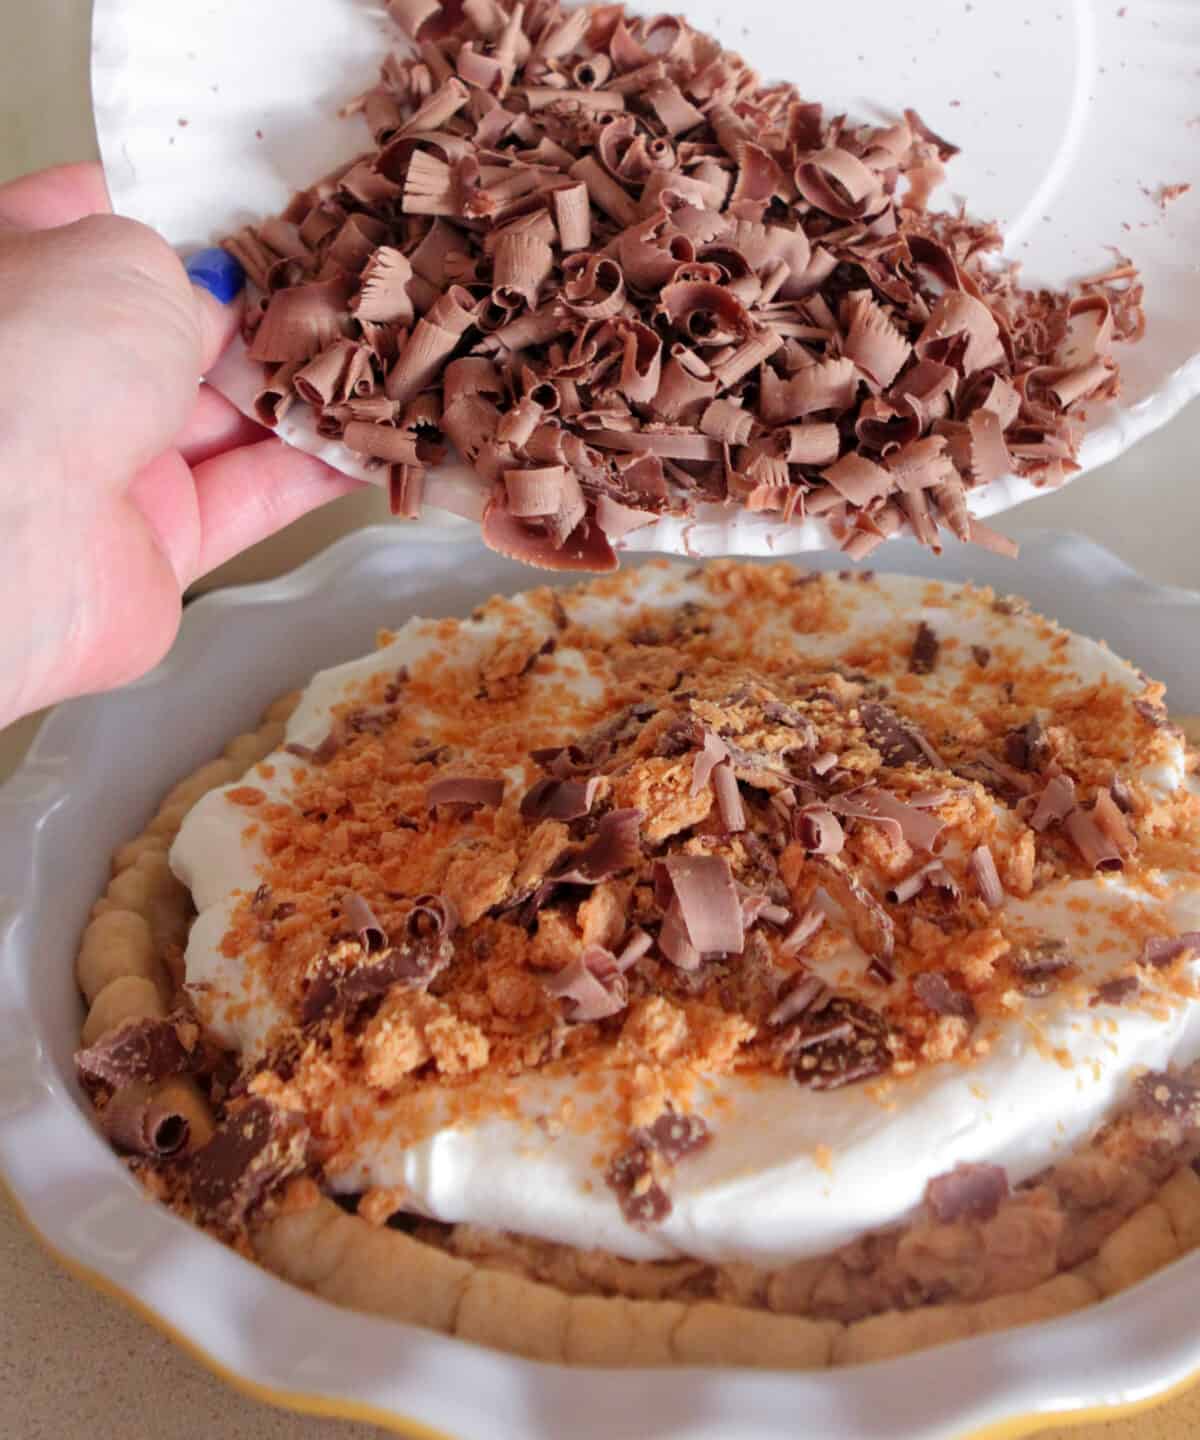 adding chocolate curls to top of pie